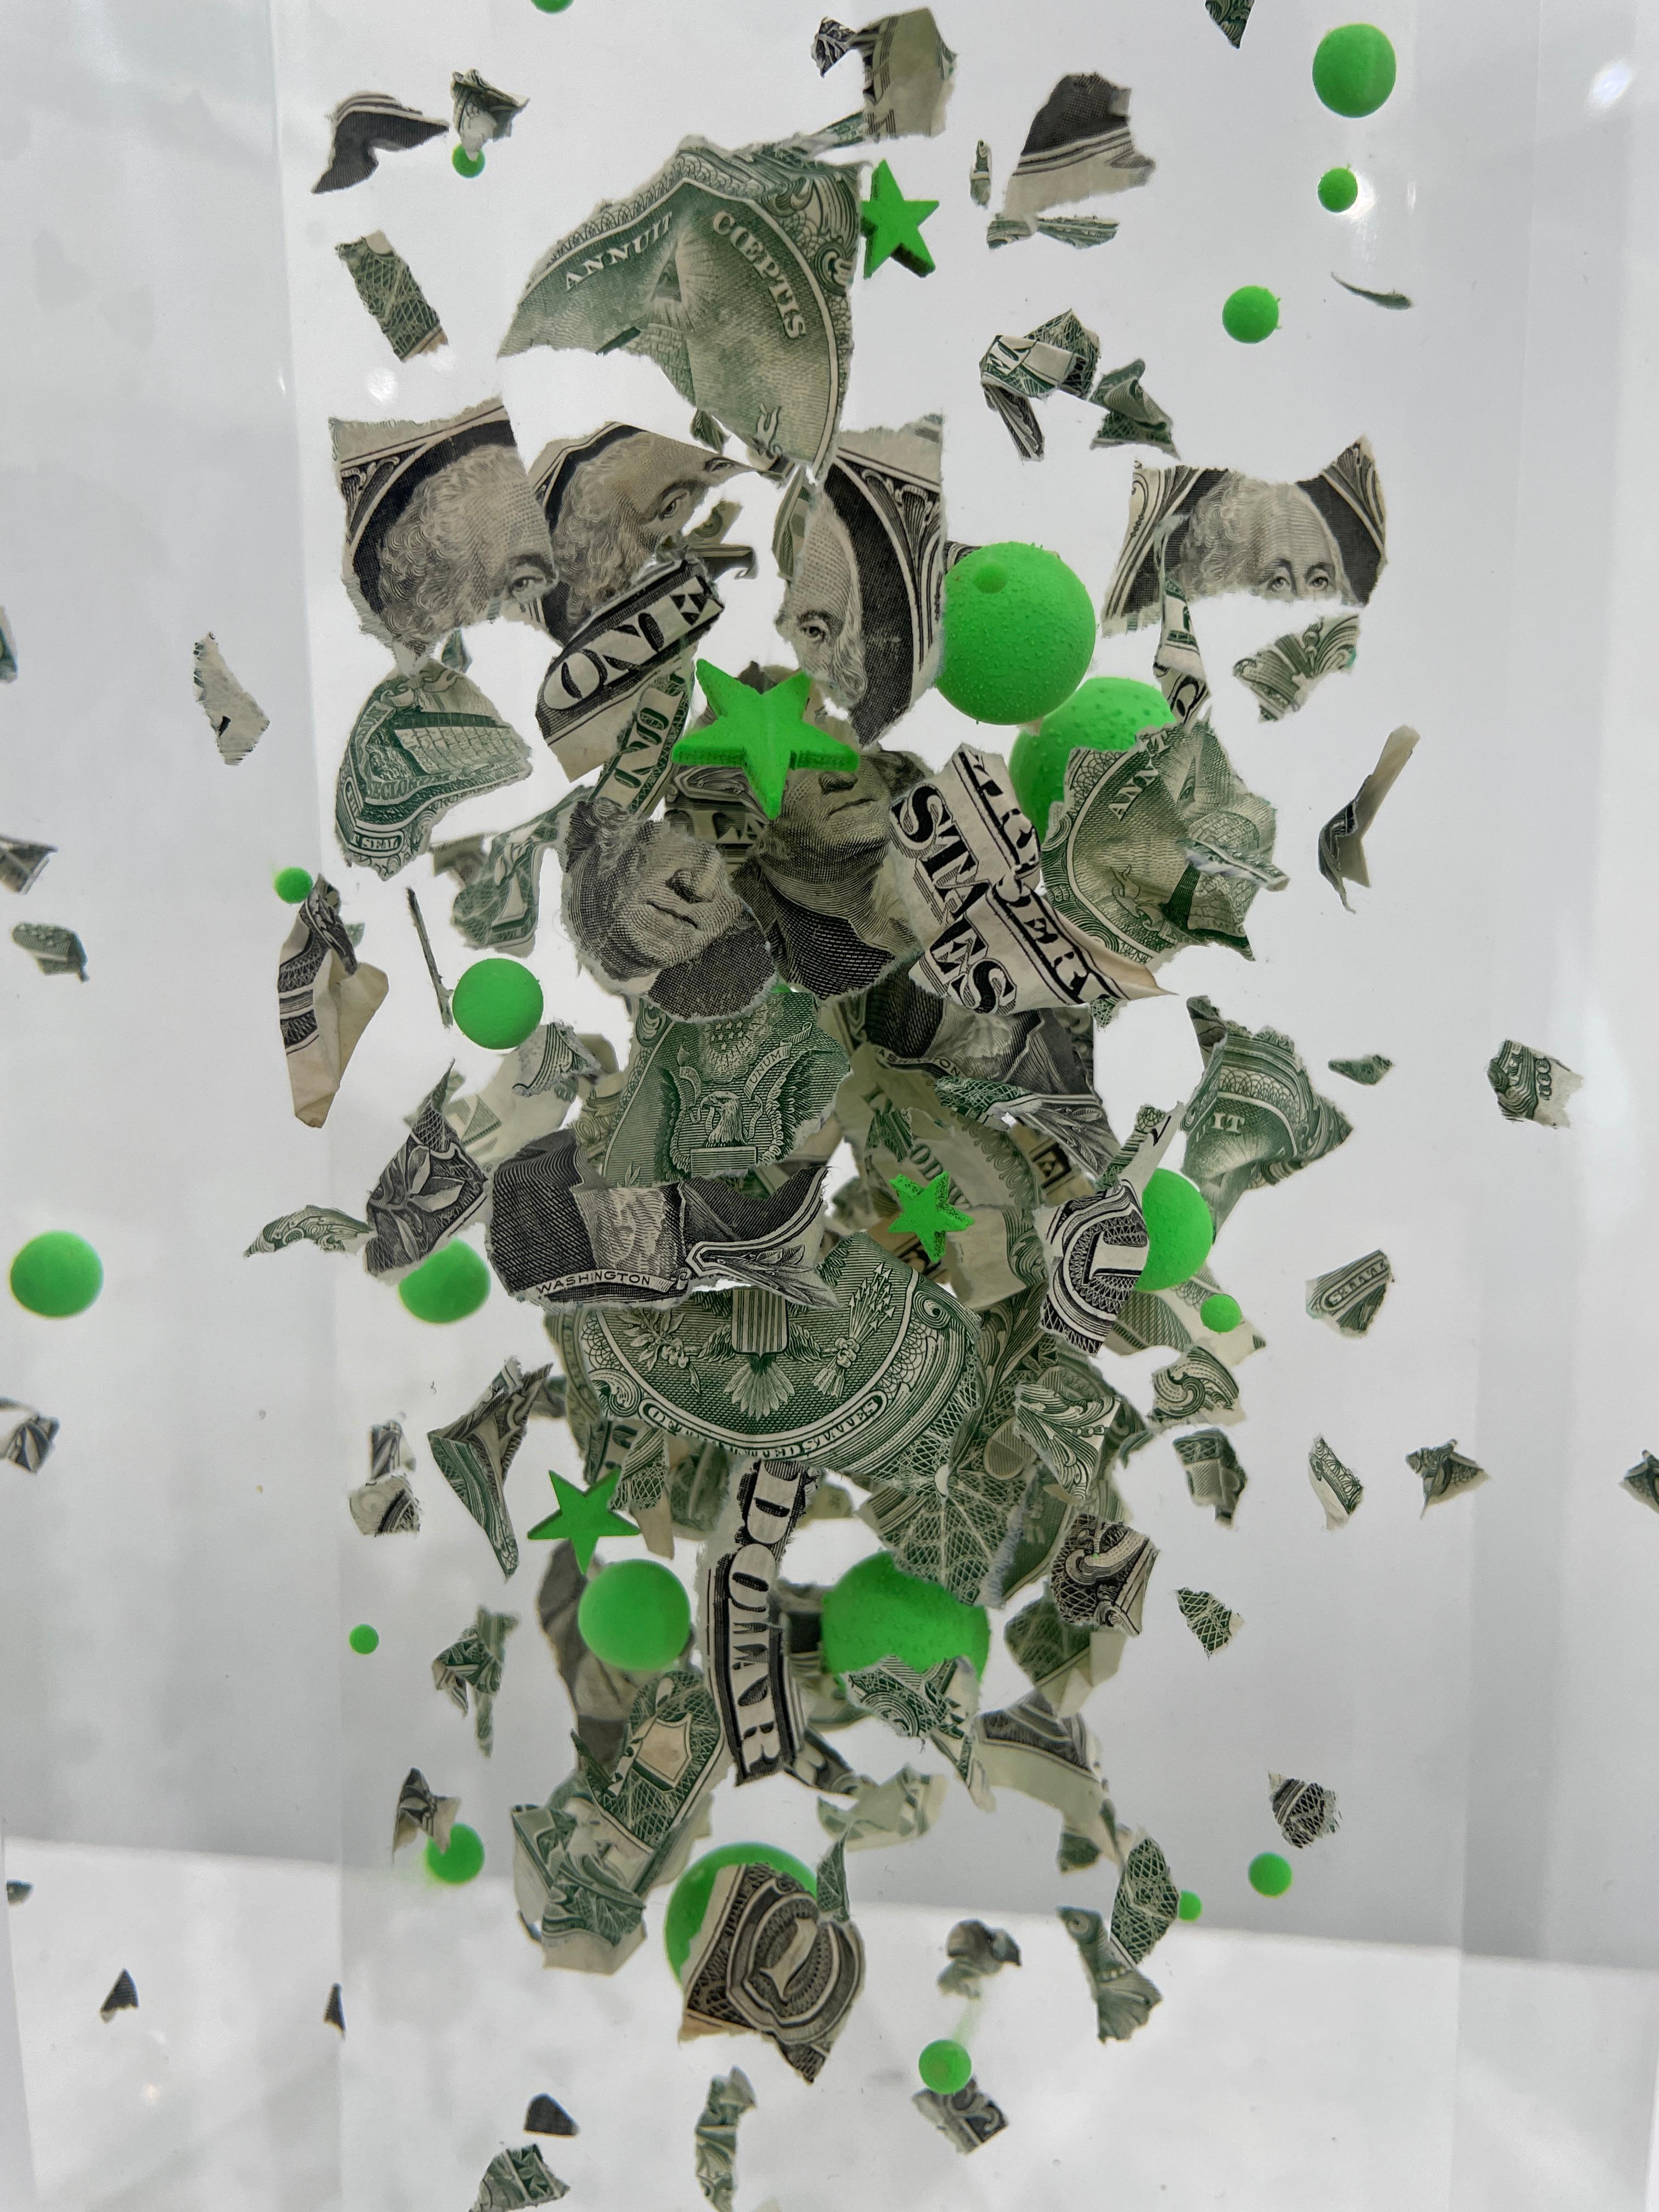 Dollars and Green Bubbles - Sculpture by Francois Bel